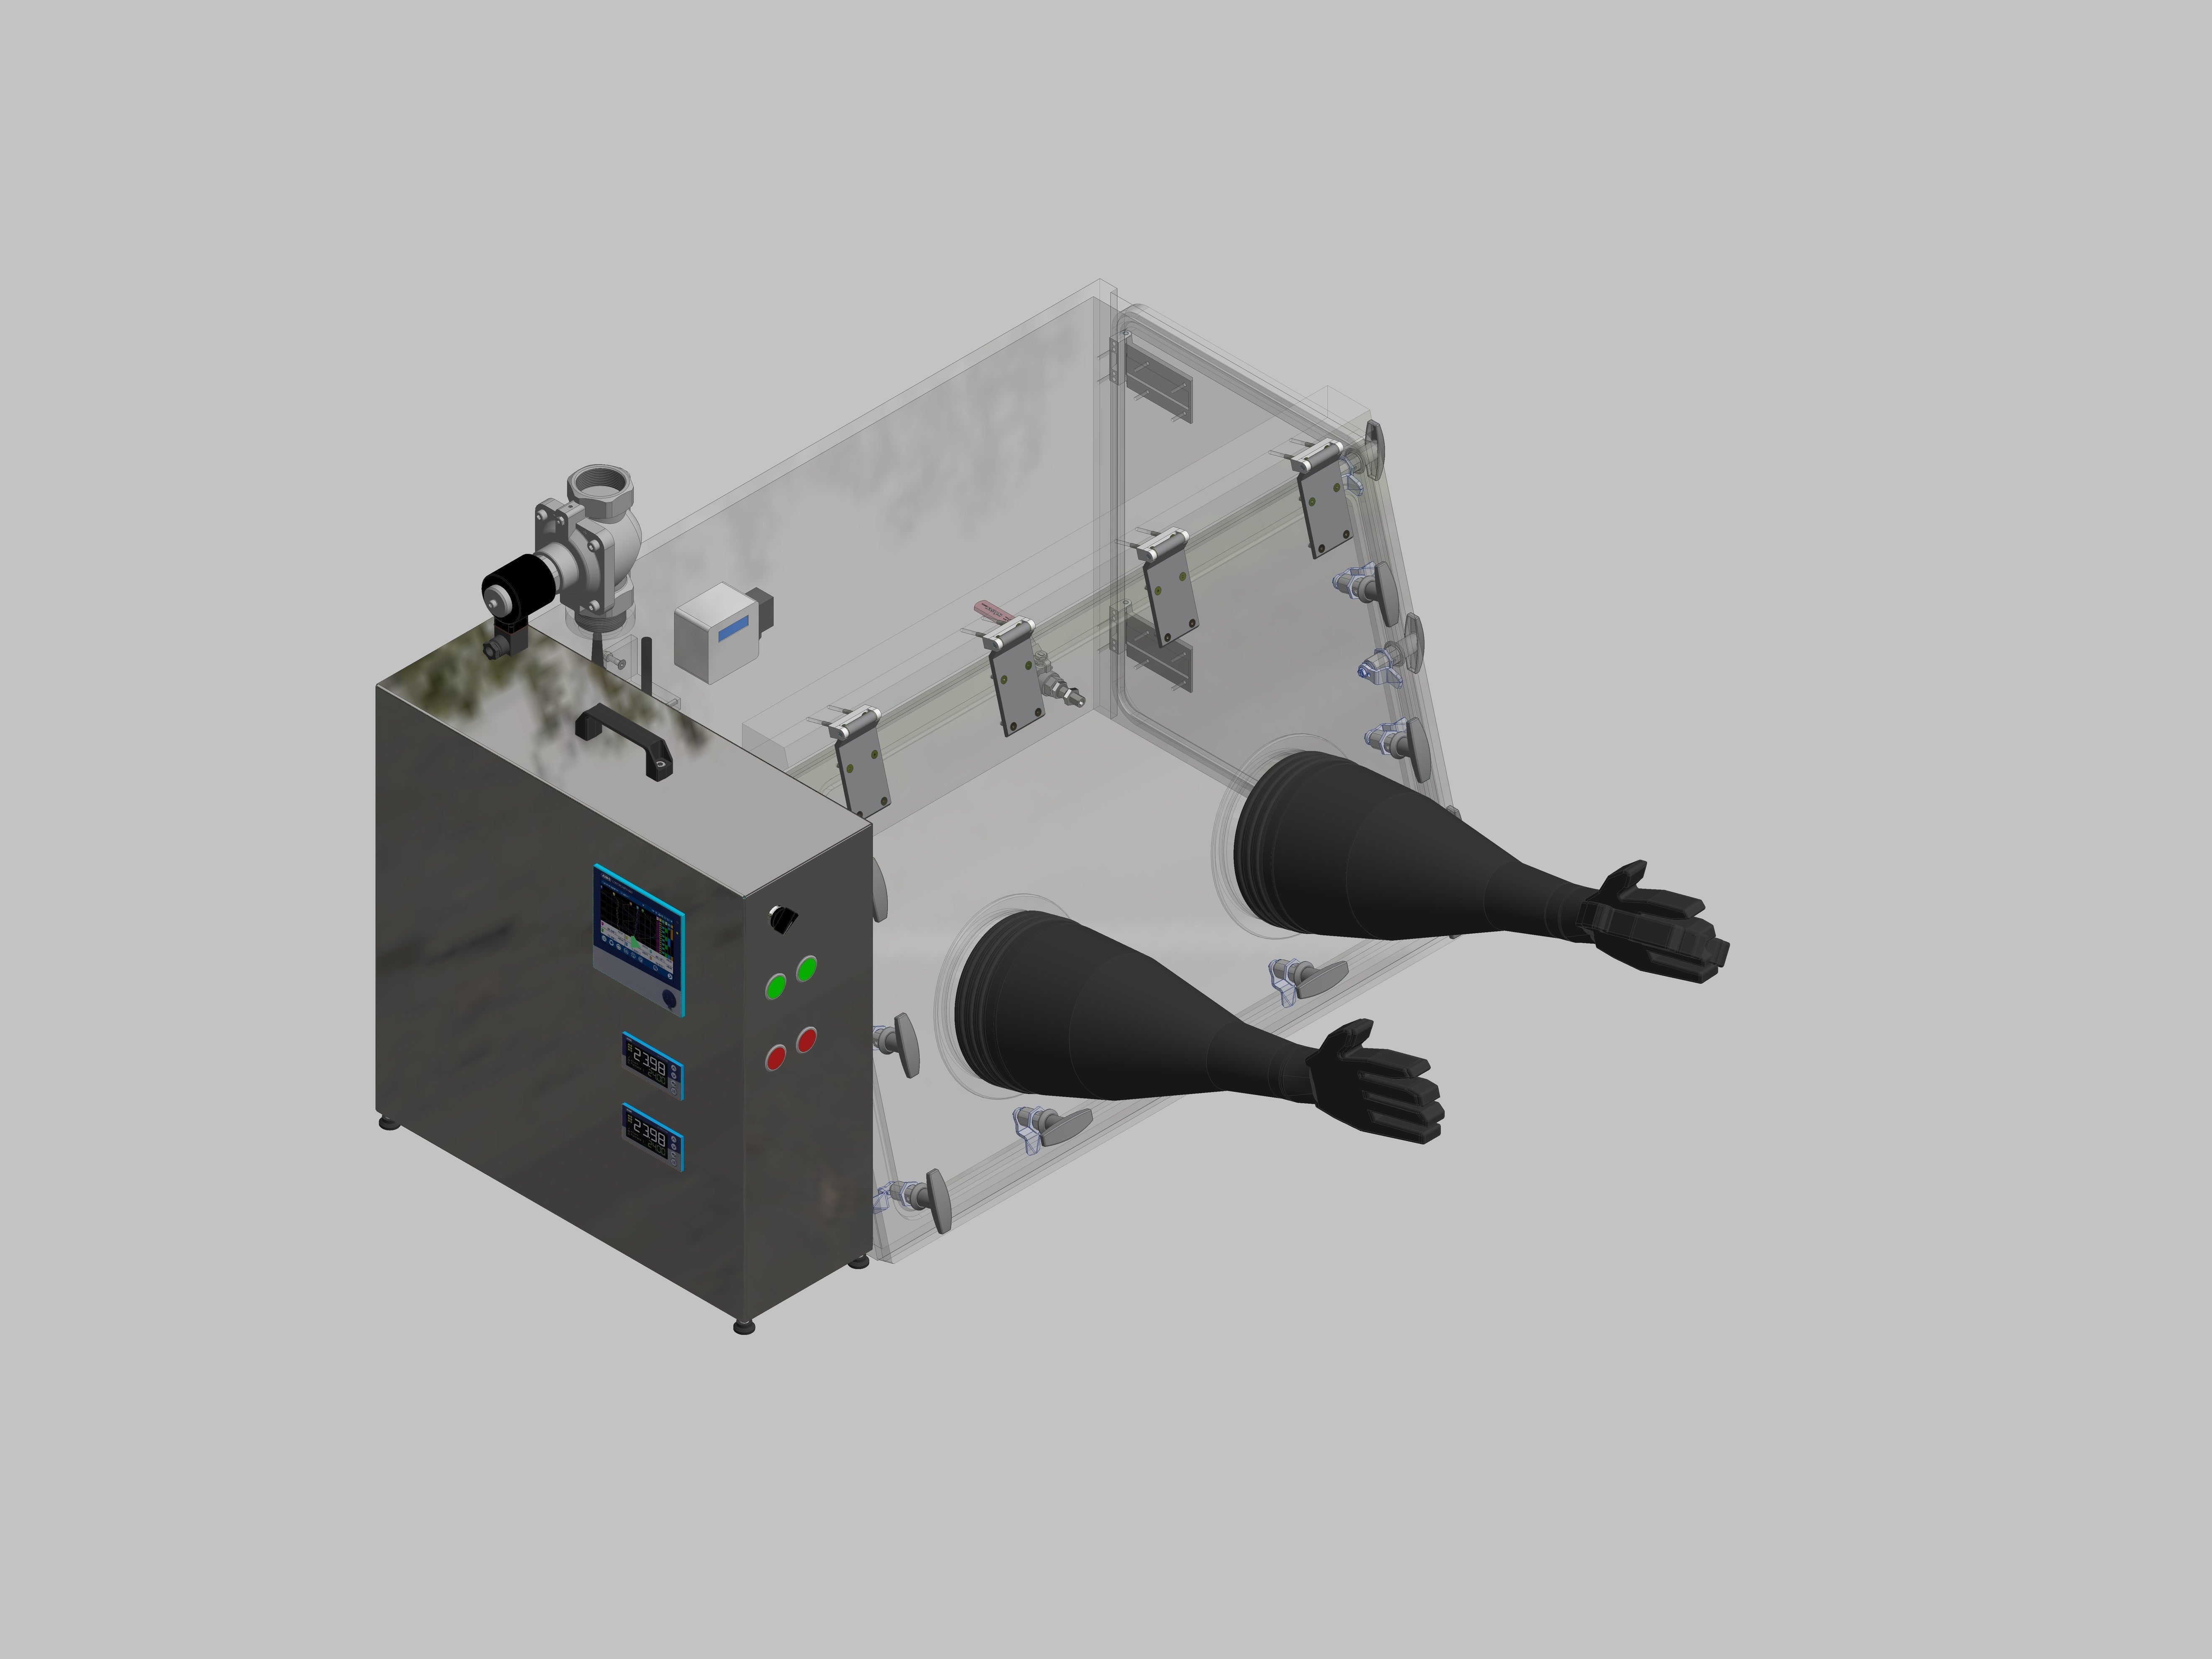 Glovebox made of acrylic&gt; Gas filling: automatic flushing with pressure control, front version: swivels upwards, side version: wing doors control: humidity controller and oxygen display with data logger